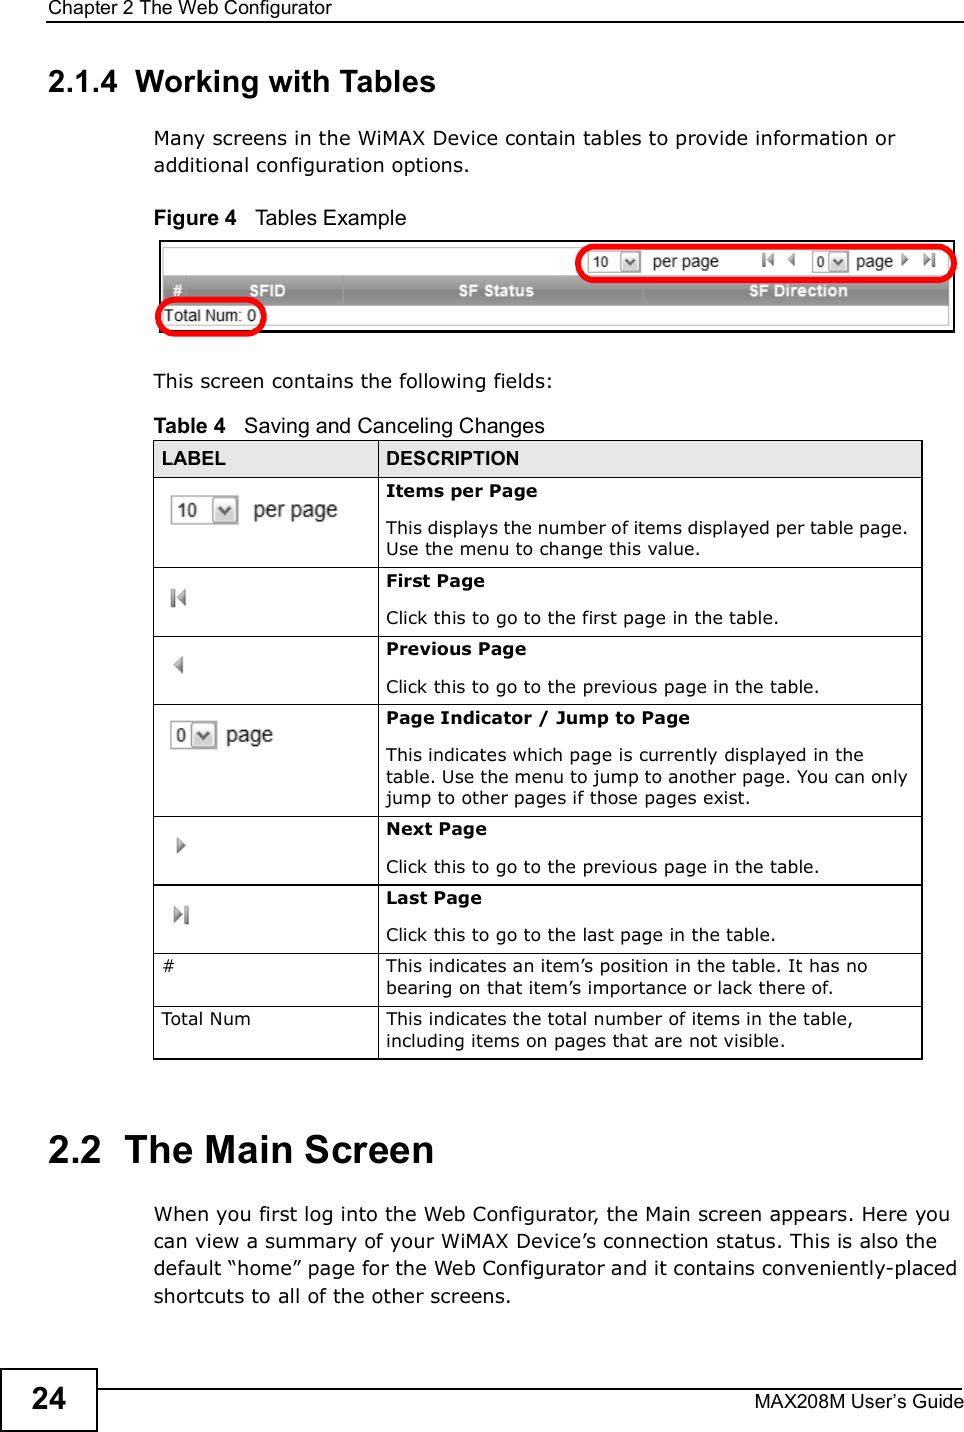 Chapter 2The Web ConfiguratorMAX208M User s Guide242.1.4  Working with TablesMany screens in the WiMAX Device contain tables to provide information or additional configuration options.Figure 4   Tables ExampleThis screen contains the following fields:2.2  The Main ScreenWhen you first log into the Web Configurator, the Main screen appears. Here you can view a summary of your WiMAX Device s connection status. This is also the default &quot;home# page for the Web Configurator and it contains conveniently-placed shortcuts to all of the other screens.Table 4   Saving and Canceling ChangesLABEL DESCRIPTIONItems per PageThis displays the number of items displayed per table page. Use the menu to change this value.First PageClick this to go to the first page in the table.Previous PageClick this to go to the previous page in the table.Page Indicator / Jump to PageThis indicates which page is currently displayed in the table. Use the menu to jump to another page. You can only jump to other pages if those pages exist.Next PageClick this to go to the previous page in the table.Last PageClick this to go to the last page in the table.#This indicates an item s position in the table. It has no bearing on that item s importance or lack there of.Total NumThis indicates the total number of items in the table, including items on pages that are not visible.